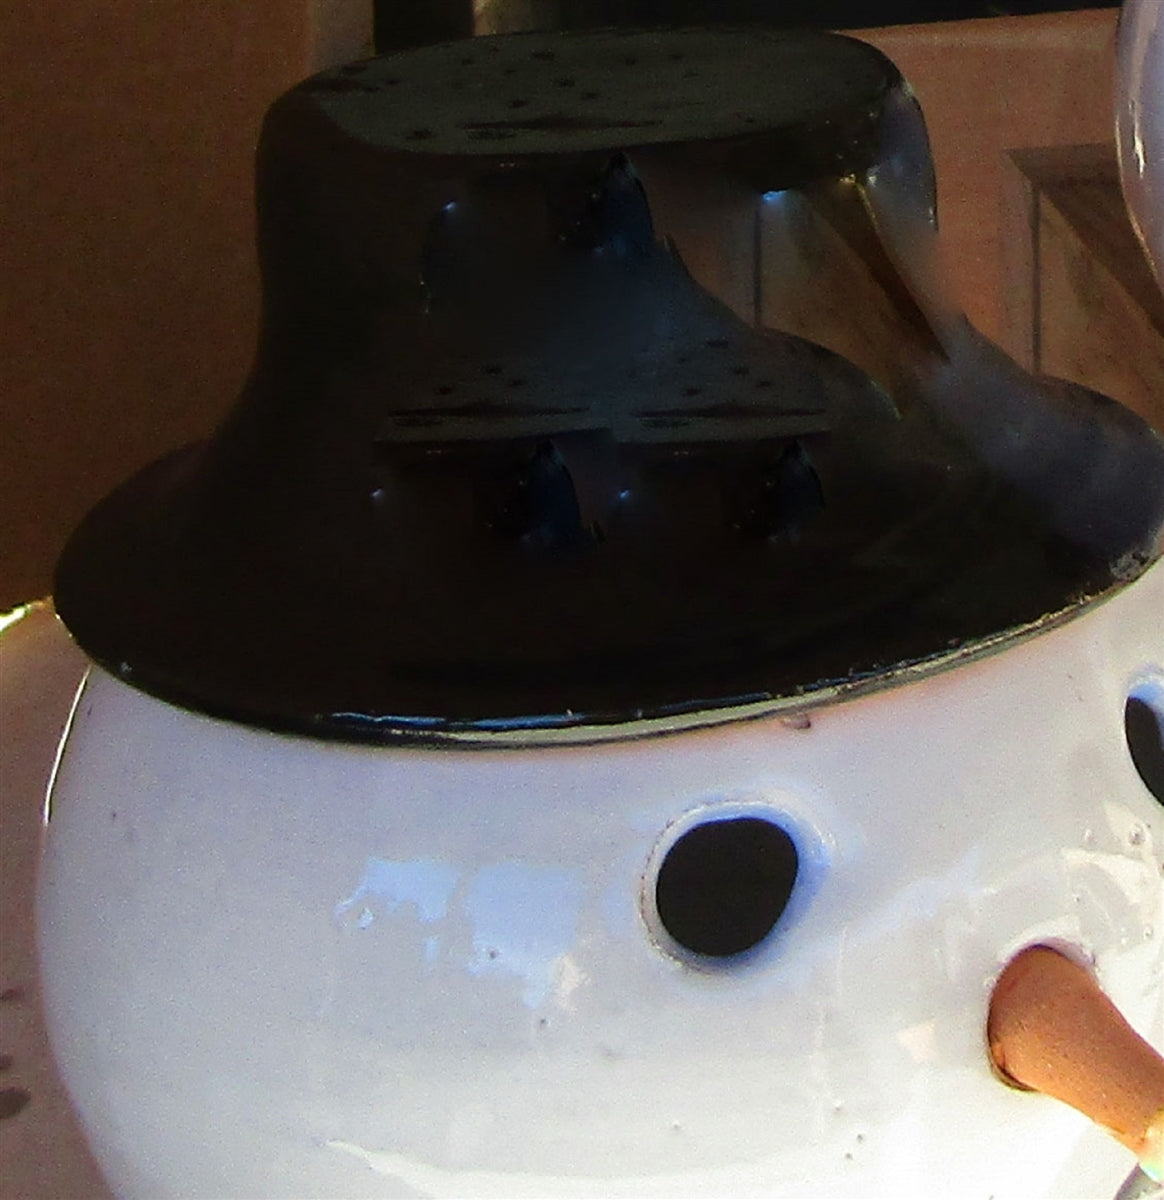 Snowman candle lantern pottery with removable hat ceramic lantern